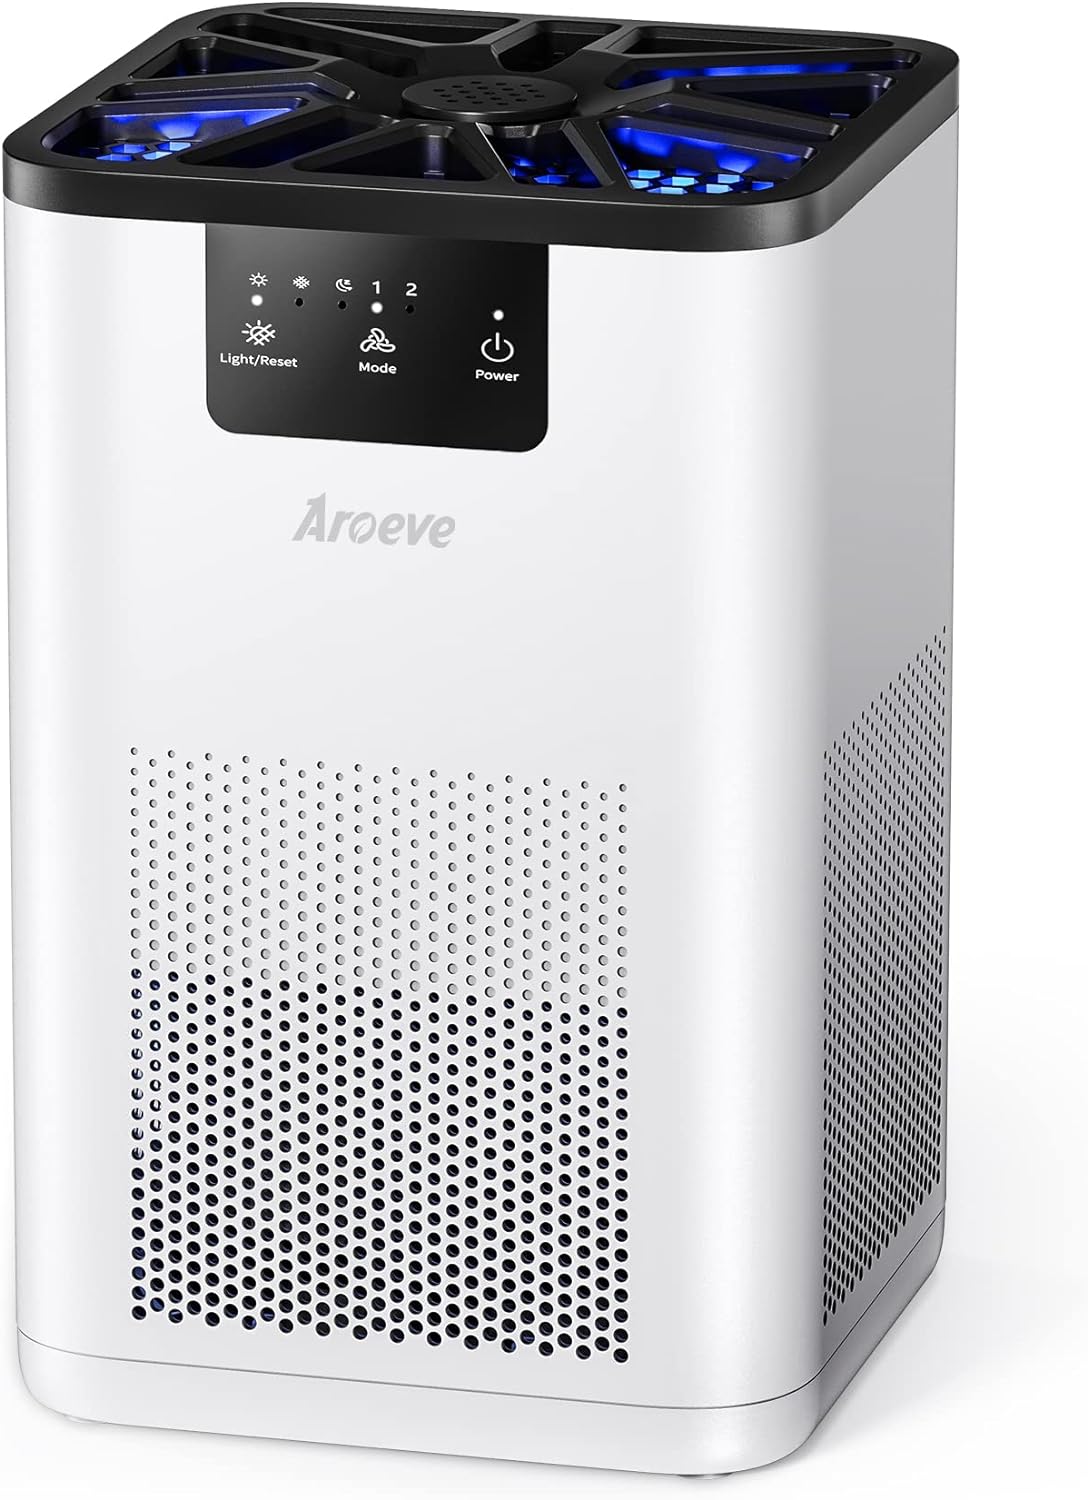 9.6" Aroeve Low-Noise HEPA Air Purifier w/ Aromatherapy (White or Black) $30 + Free Shipping w/ Prime or on $35+